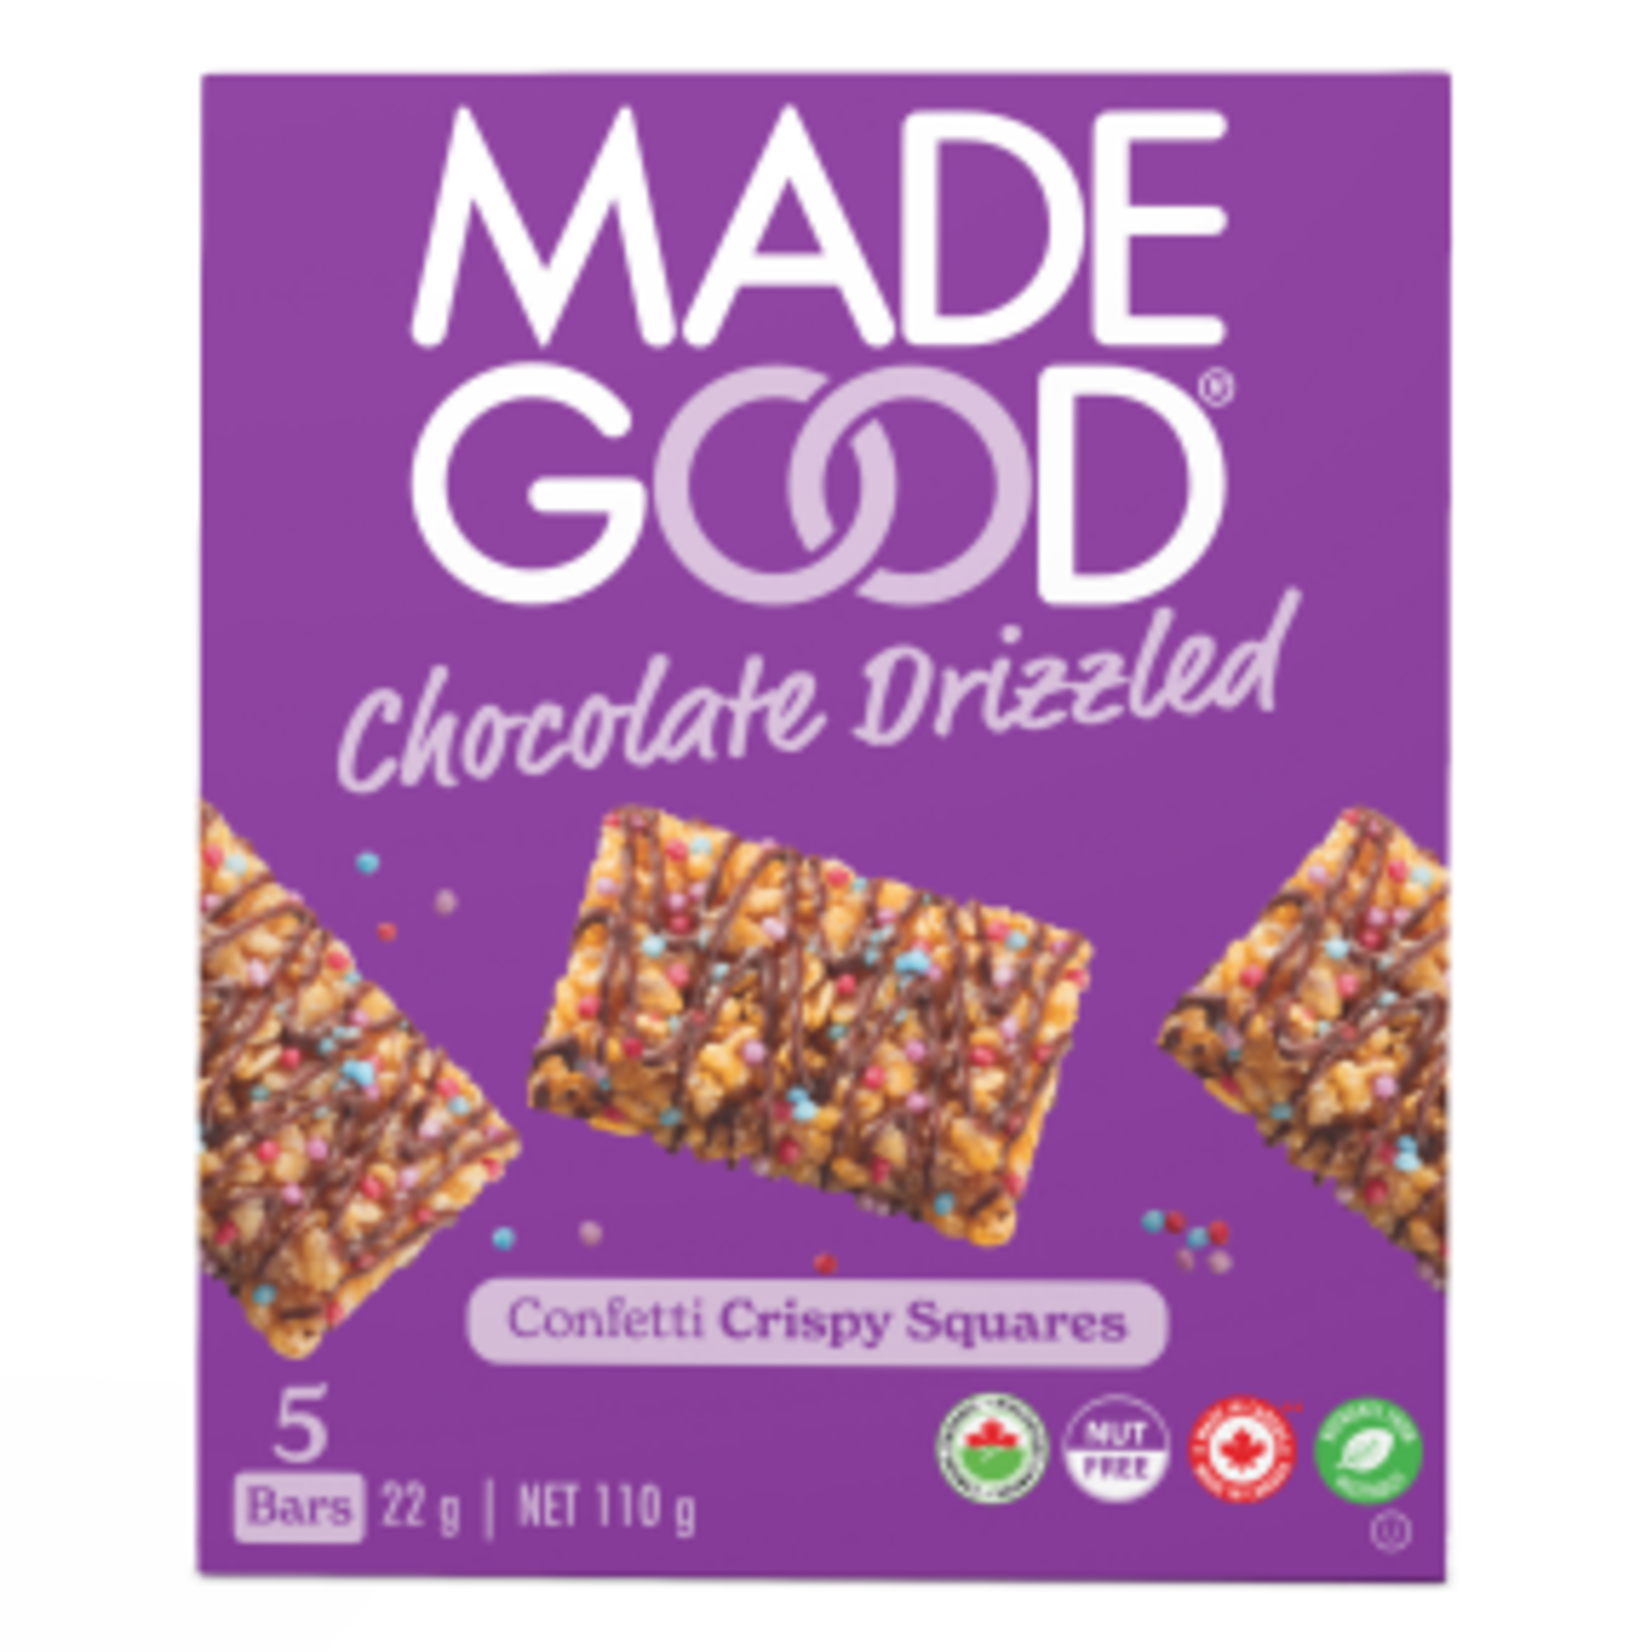 MADE GOOD MADE GOOD CRISPY SQUARES CHOCOLATE DRIZZLED CONFETTI (5BARS/22g)